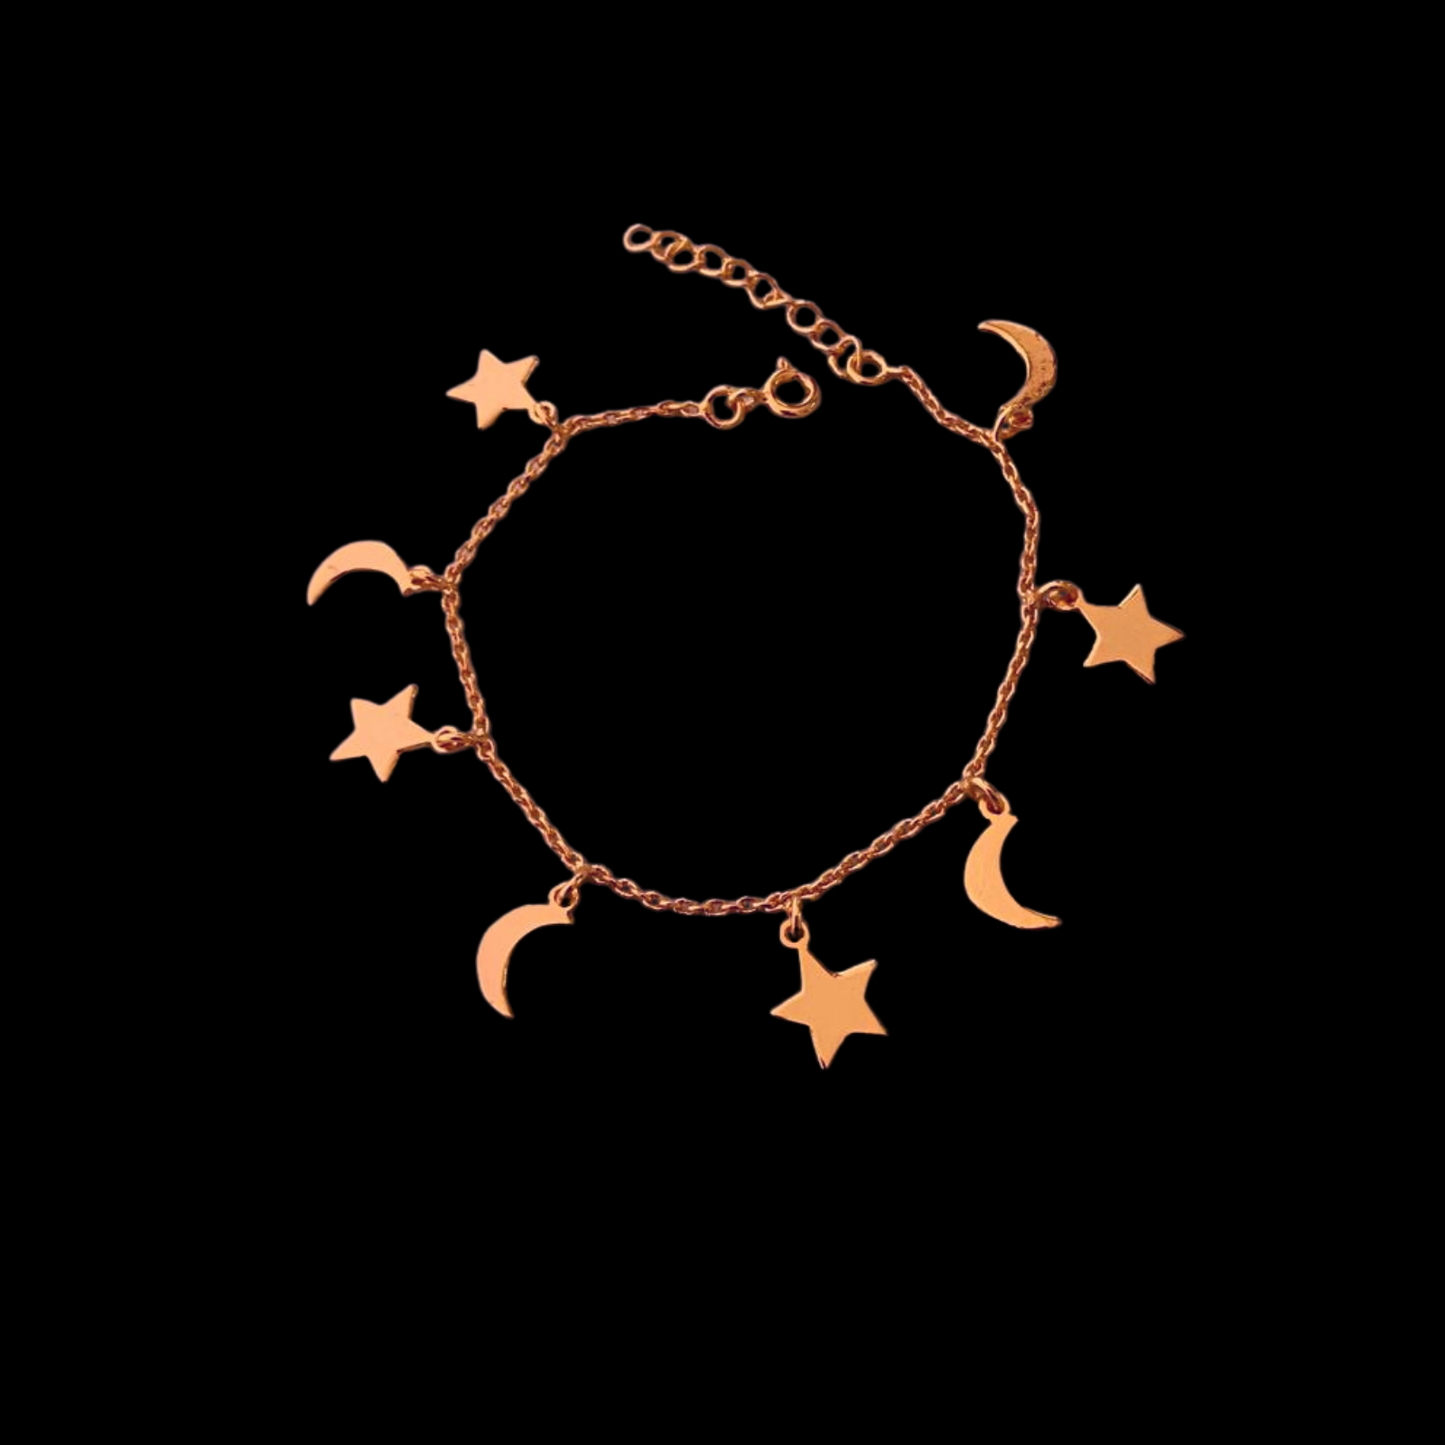 Moon and star Bracelet in 92.5 Sterling Silver